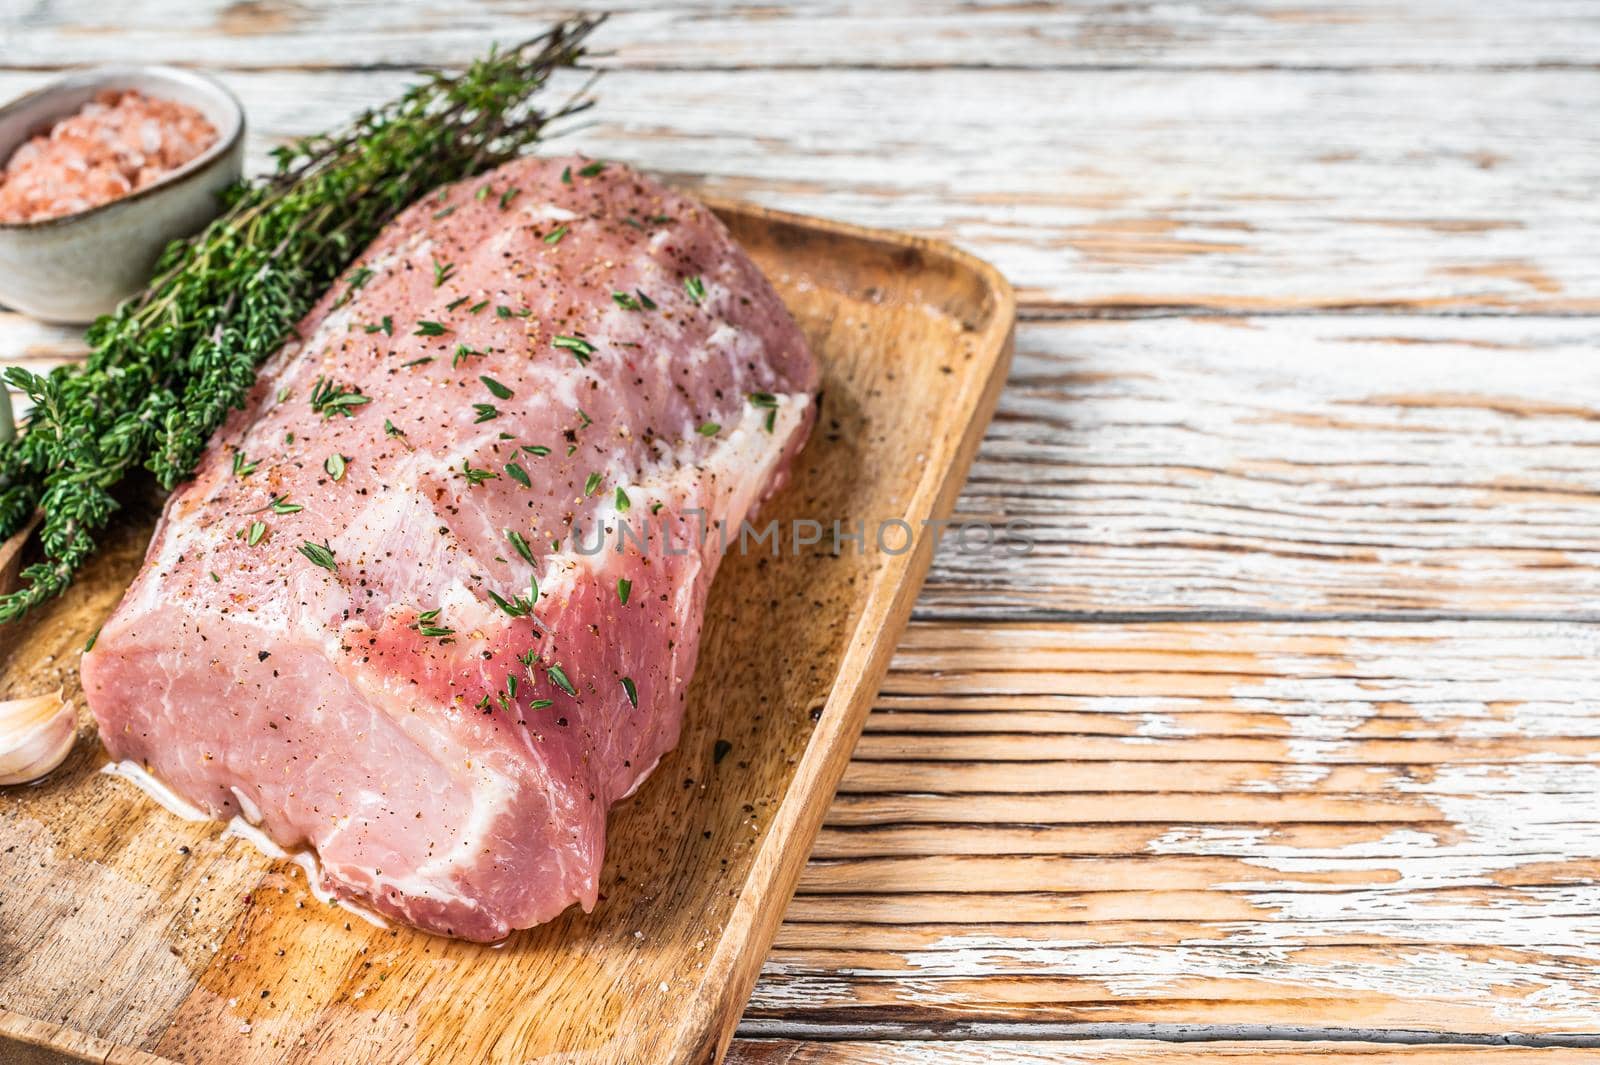 Raw Whole boneless pork loin meat with thyme and salt on rustic board. White wooden background. Top view. Copy space.